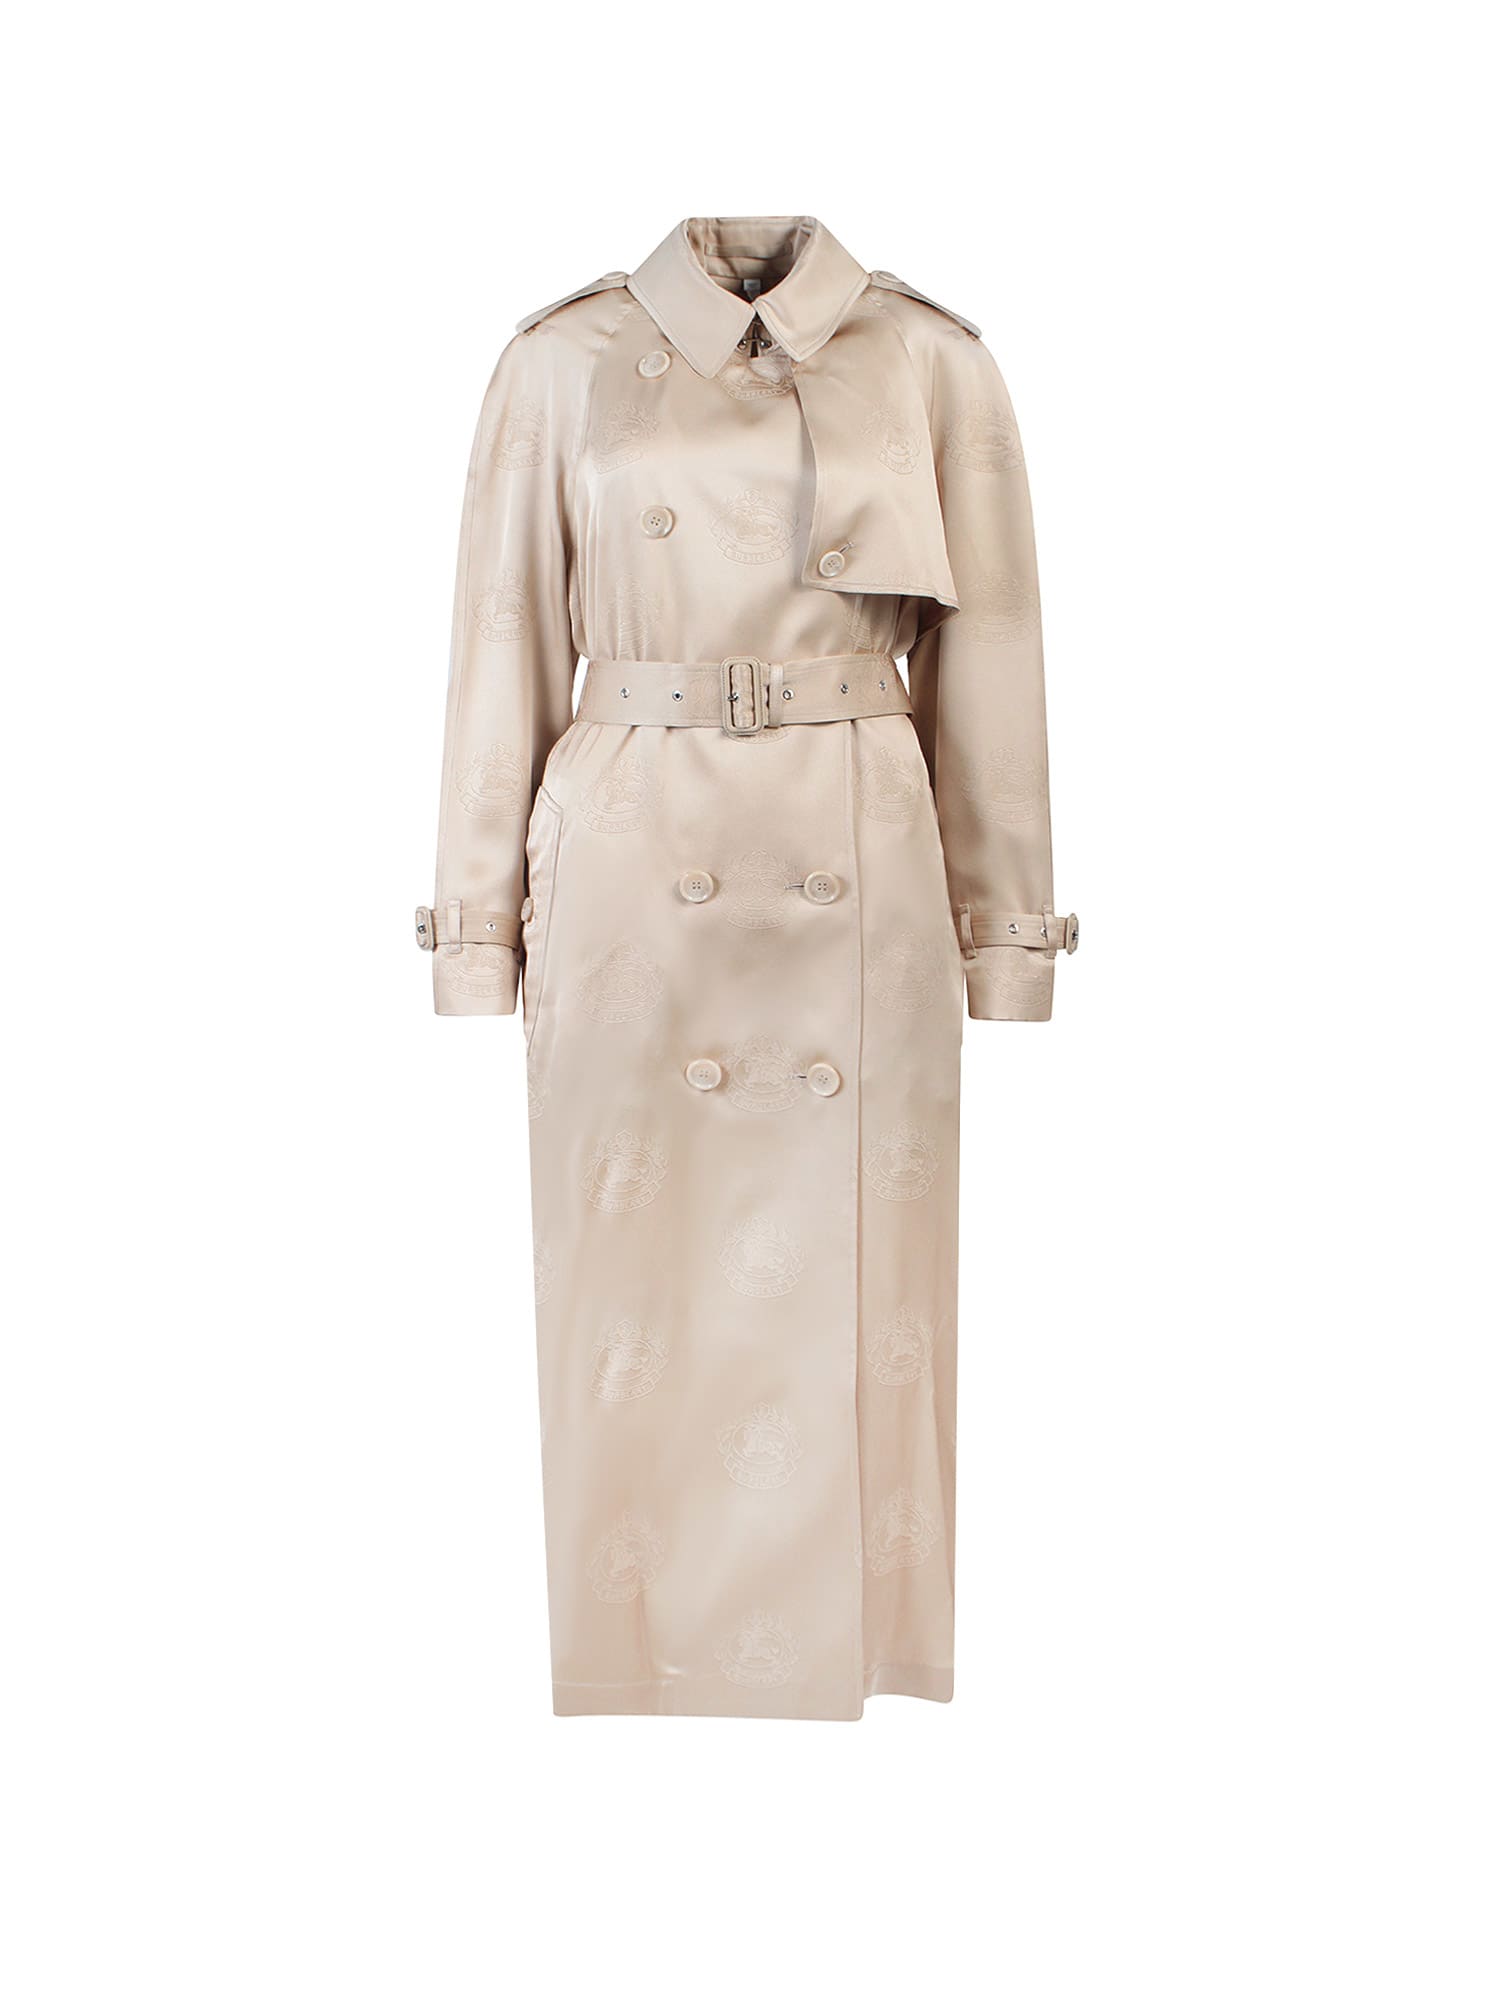 Burberry Pedley Trench